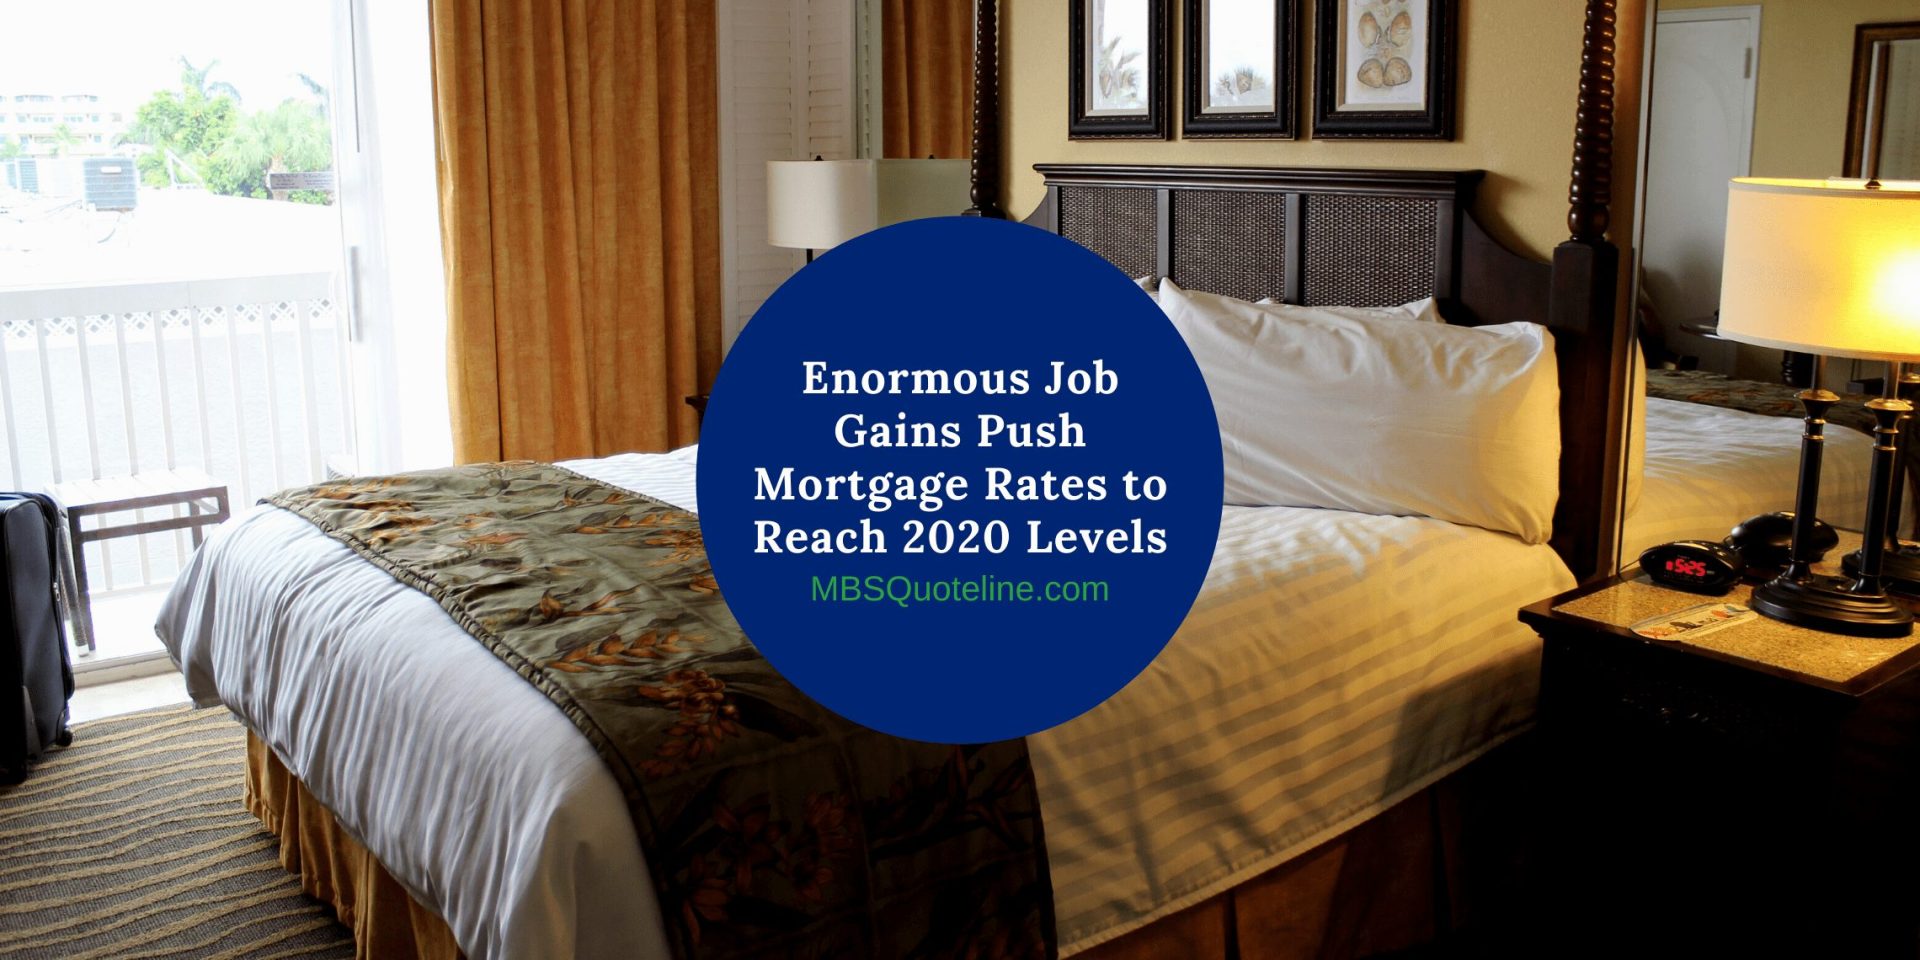 enormous job gains push mortgage rates reach 2020 levels mortgagetime mbsquoteline featured